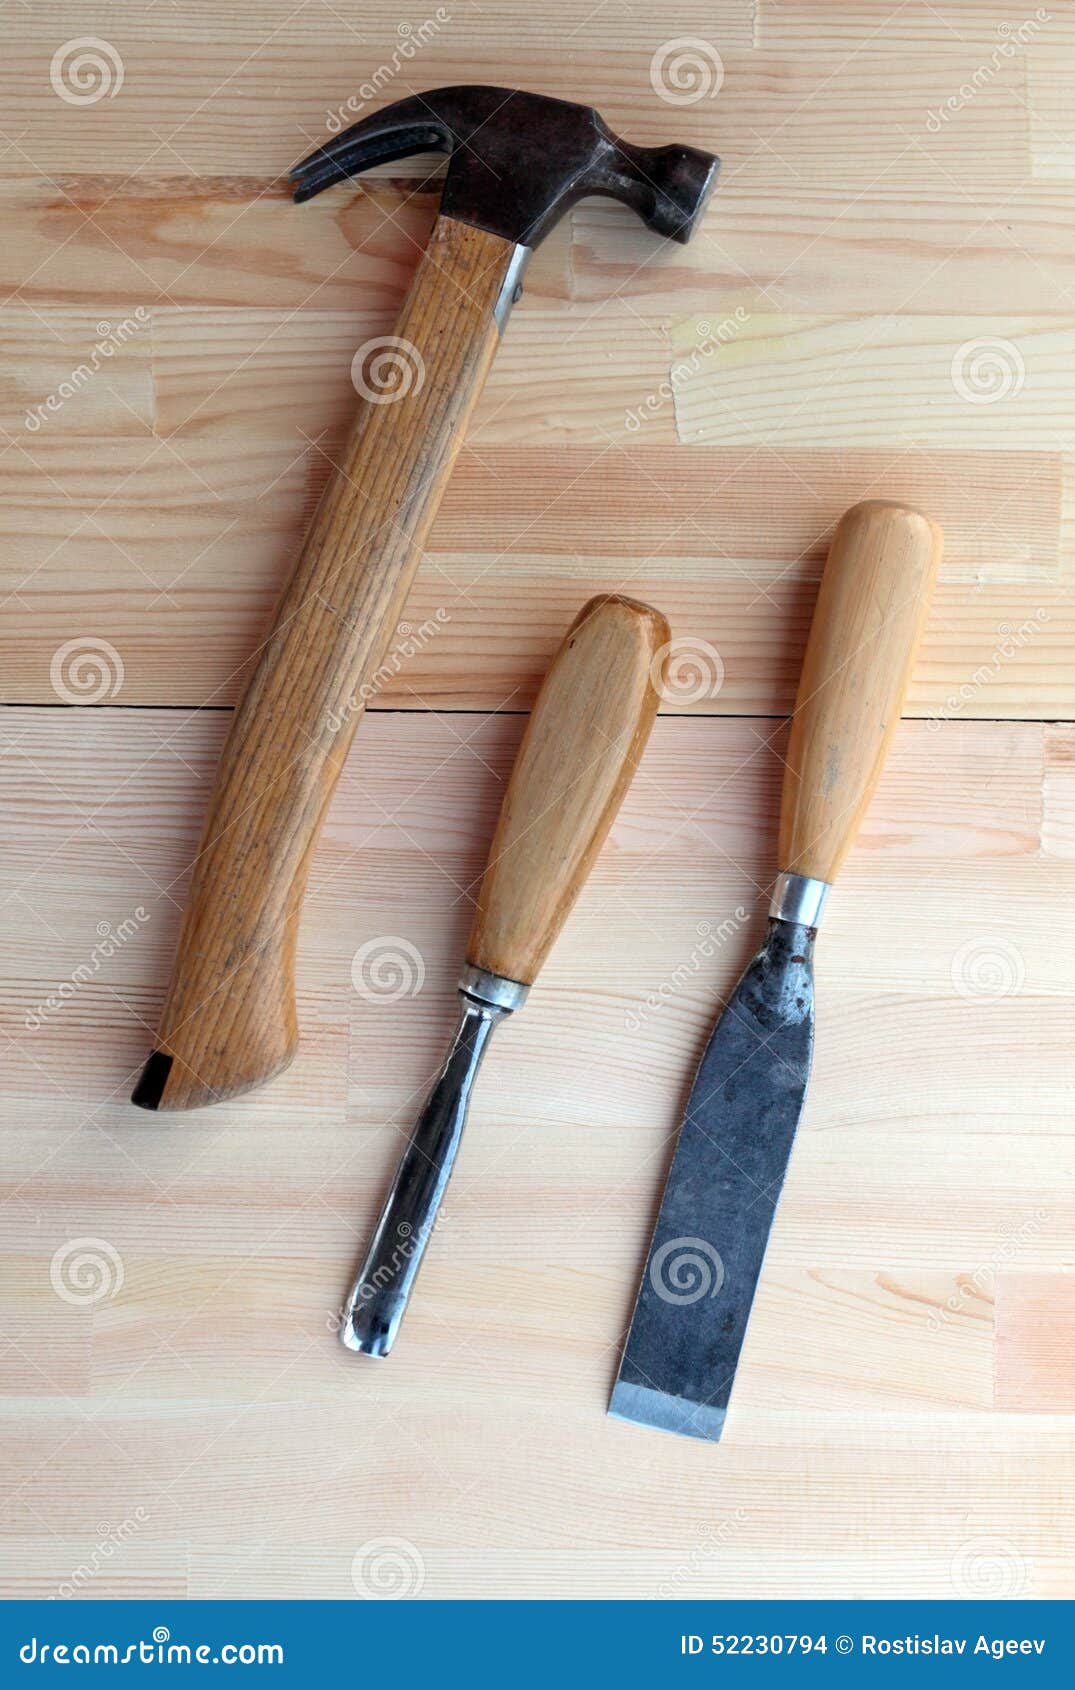 Carpenter Tools Plane, Hammer and Chisel Stock Photo - Image of jack,  metal: 52230794